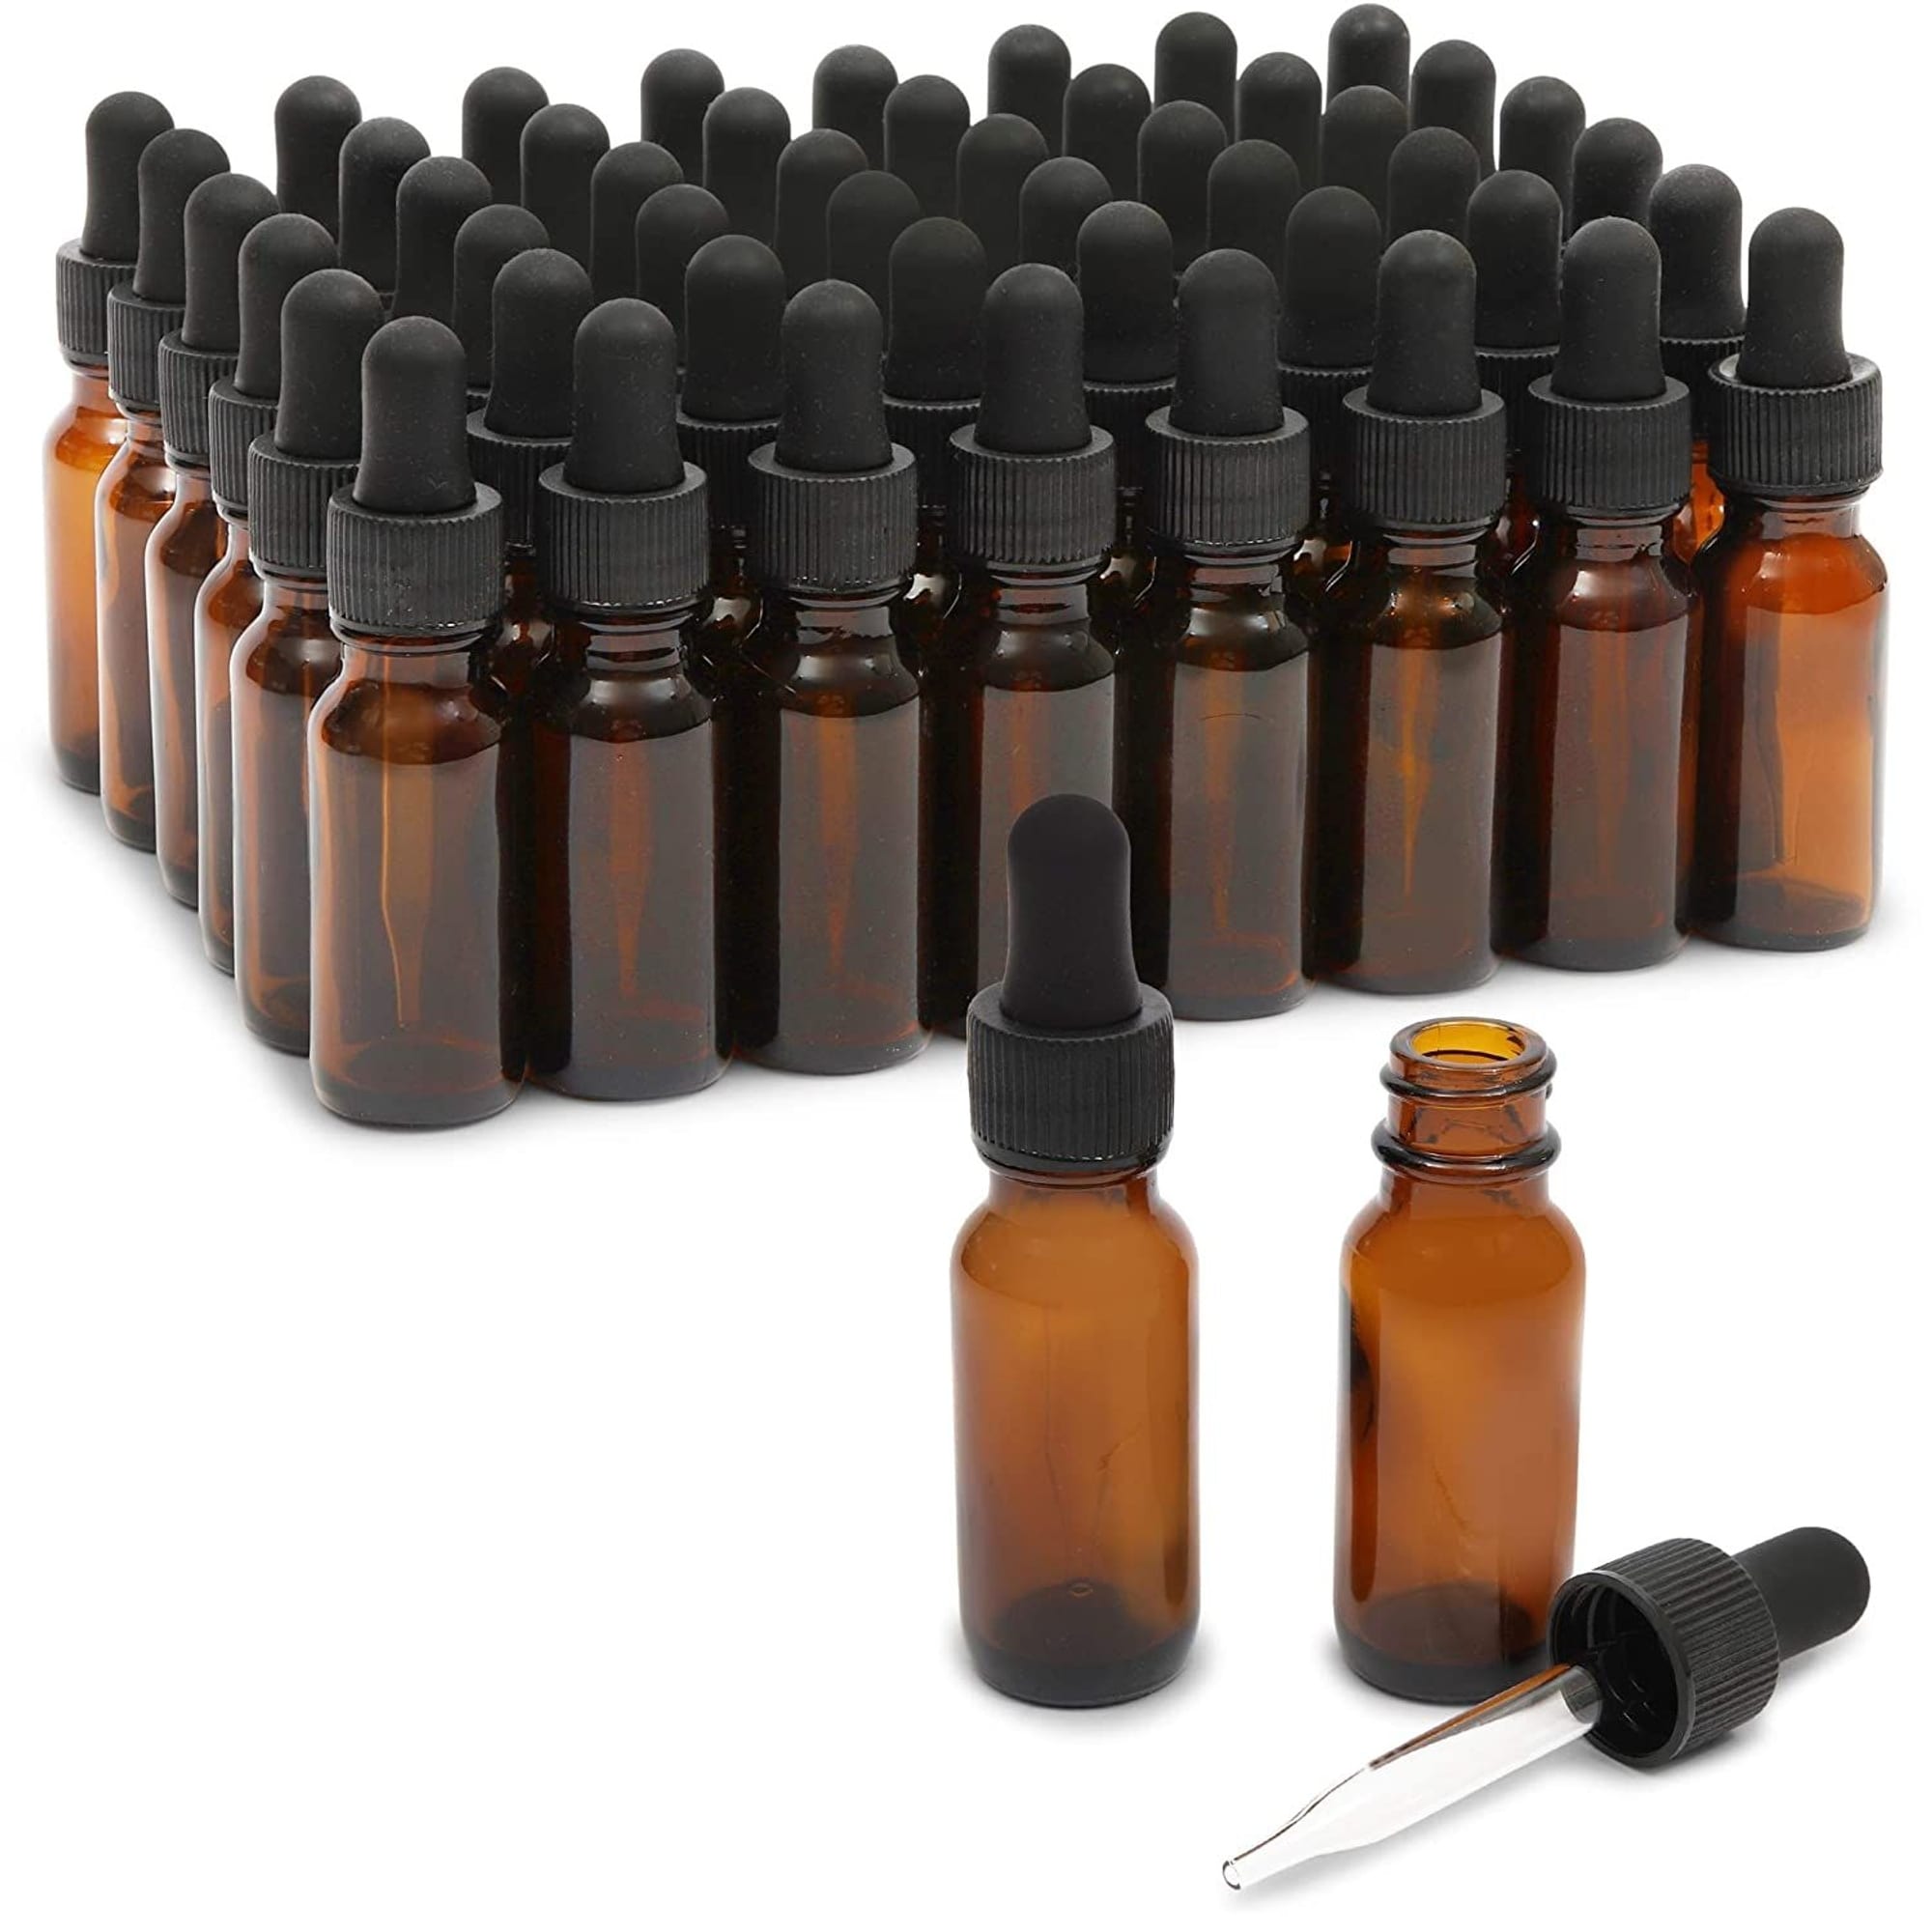 https://ak1.ostkcdn.com/images/products/is/images/direct/254cee8f75d10676890255c475a90df20fd9692b/48-Pack-of-0.5oz-Amber-Glass-Bottle-with-Dropper-Dispenser-and-6-Funnels-for-Essential-Oils%2C-Travel-%2854-Total-Pieces%2C-15ml%29.jpg